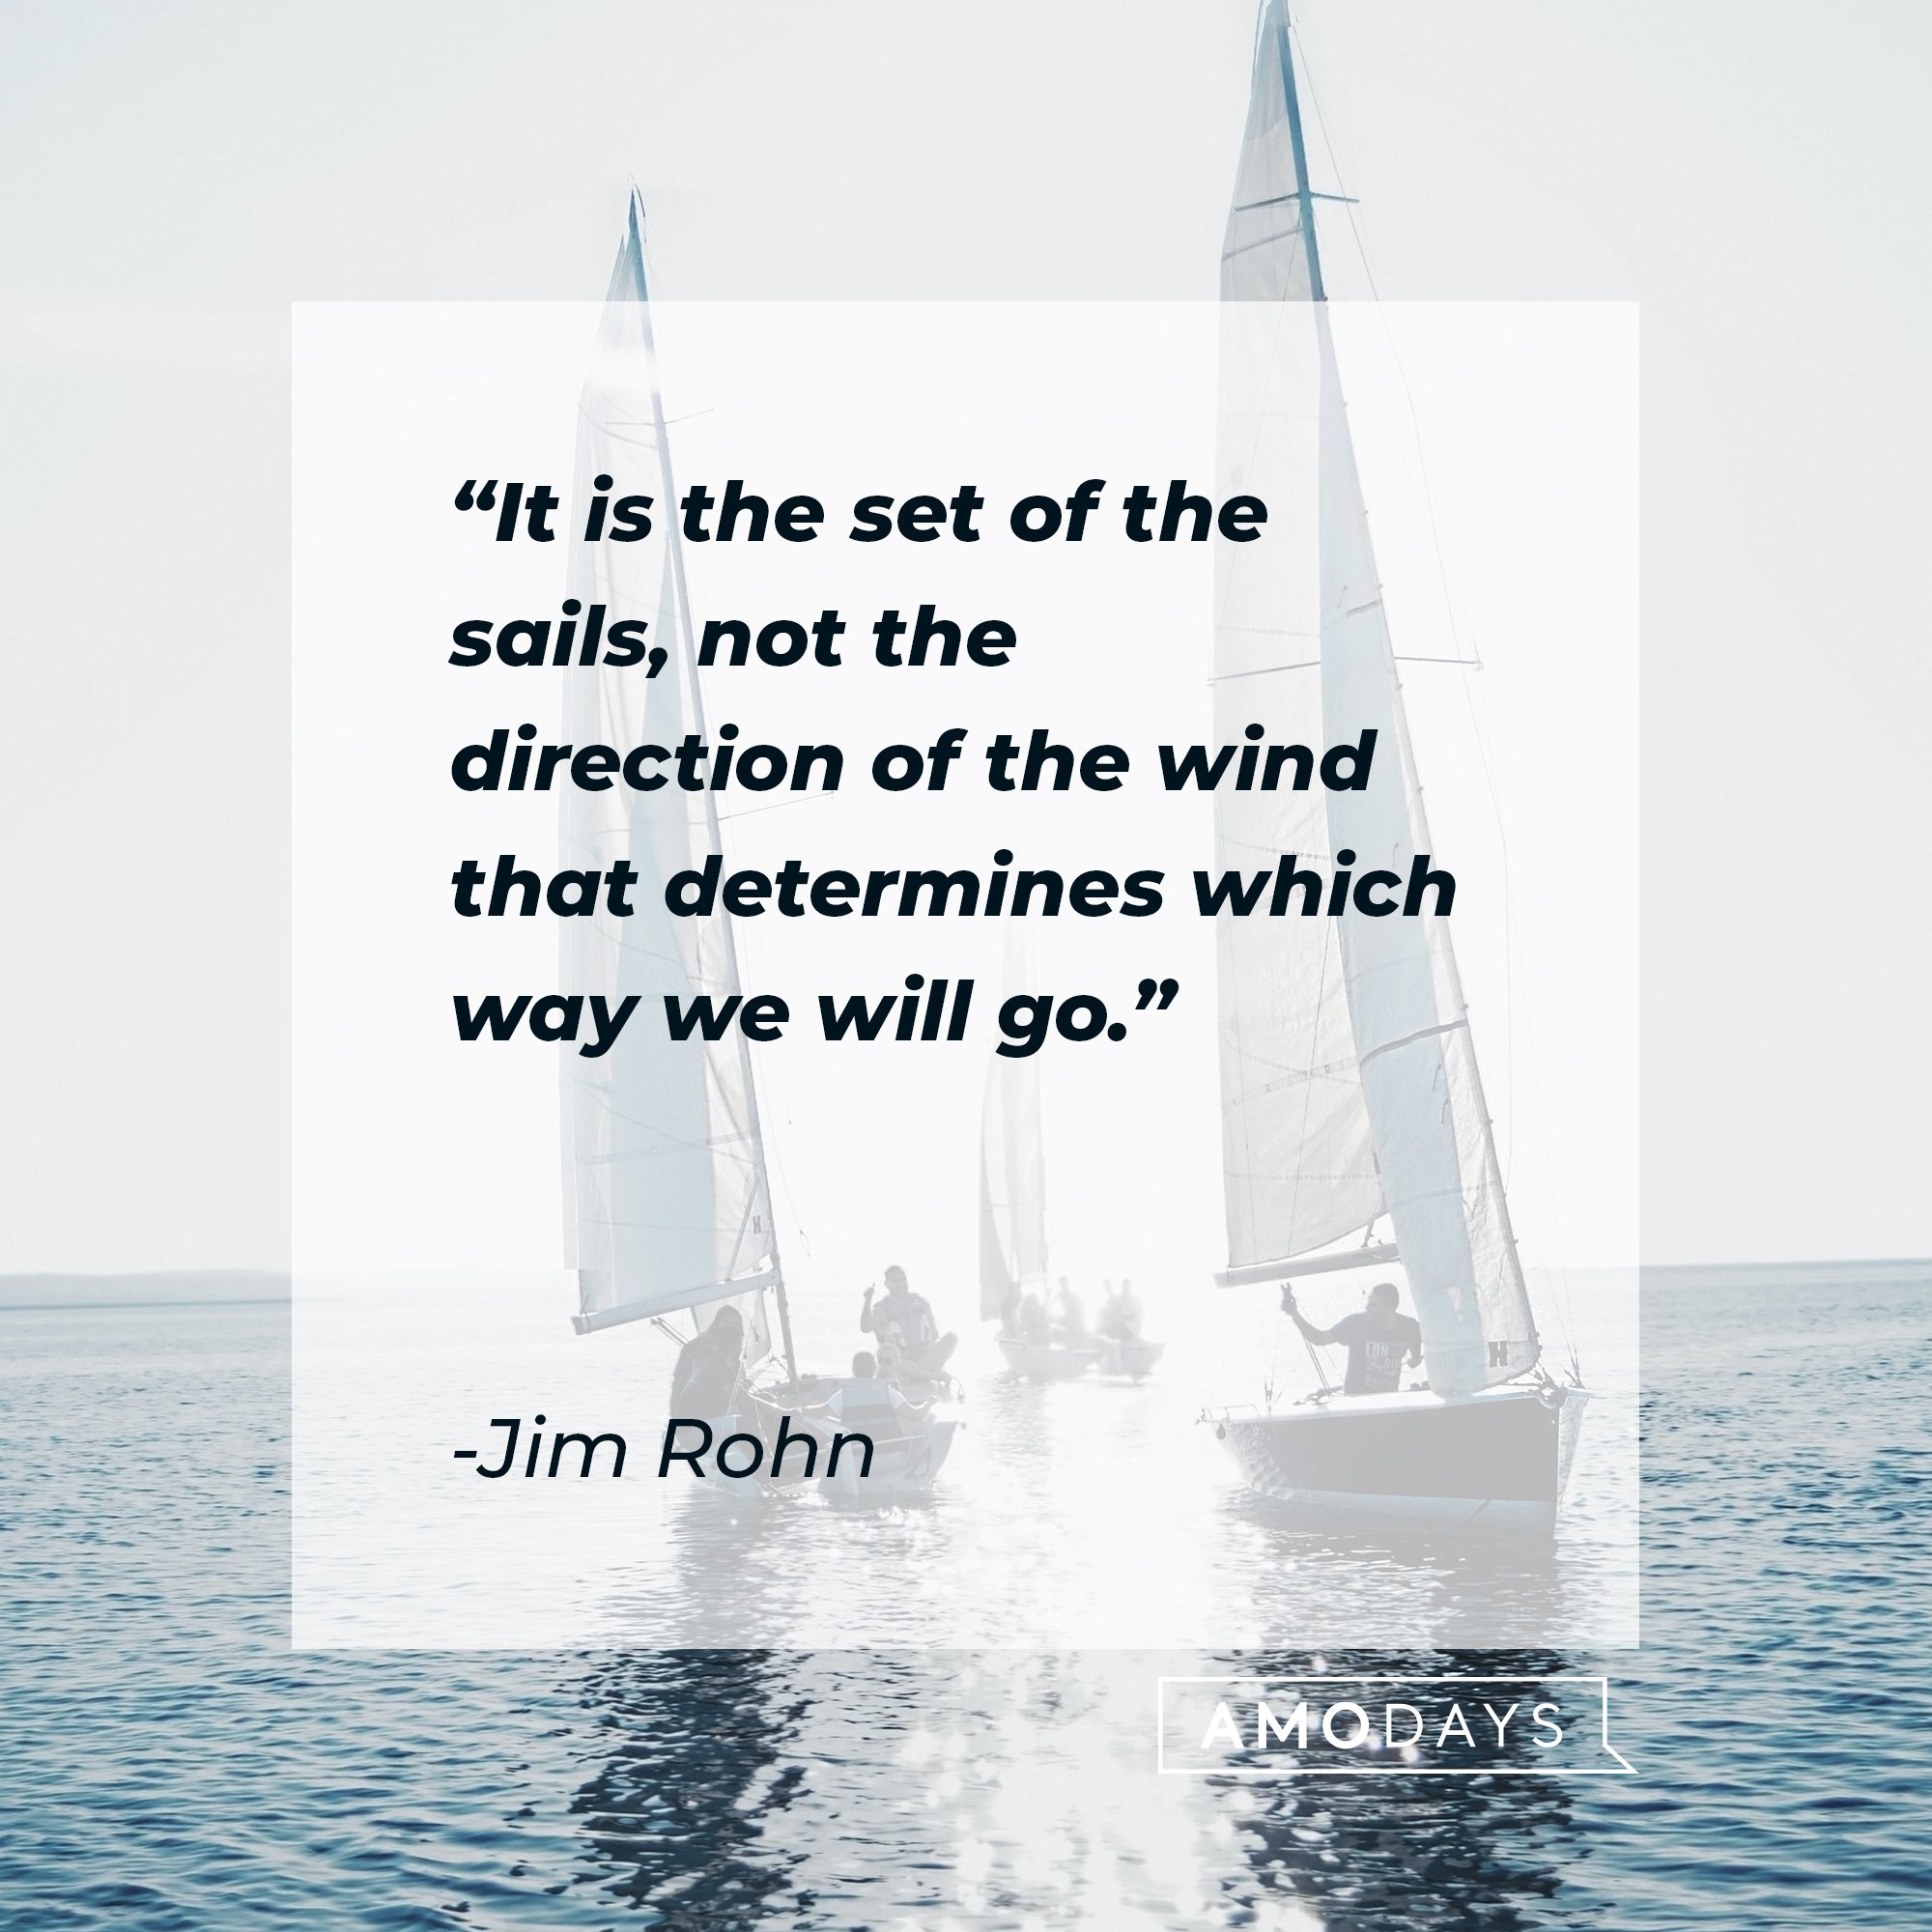 Jim Rohn's quote: "It is the set of the sails, not the direction of the wind that determines which way we will go." | Image: AmoDays